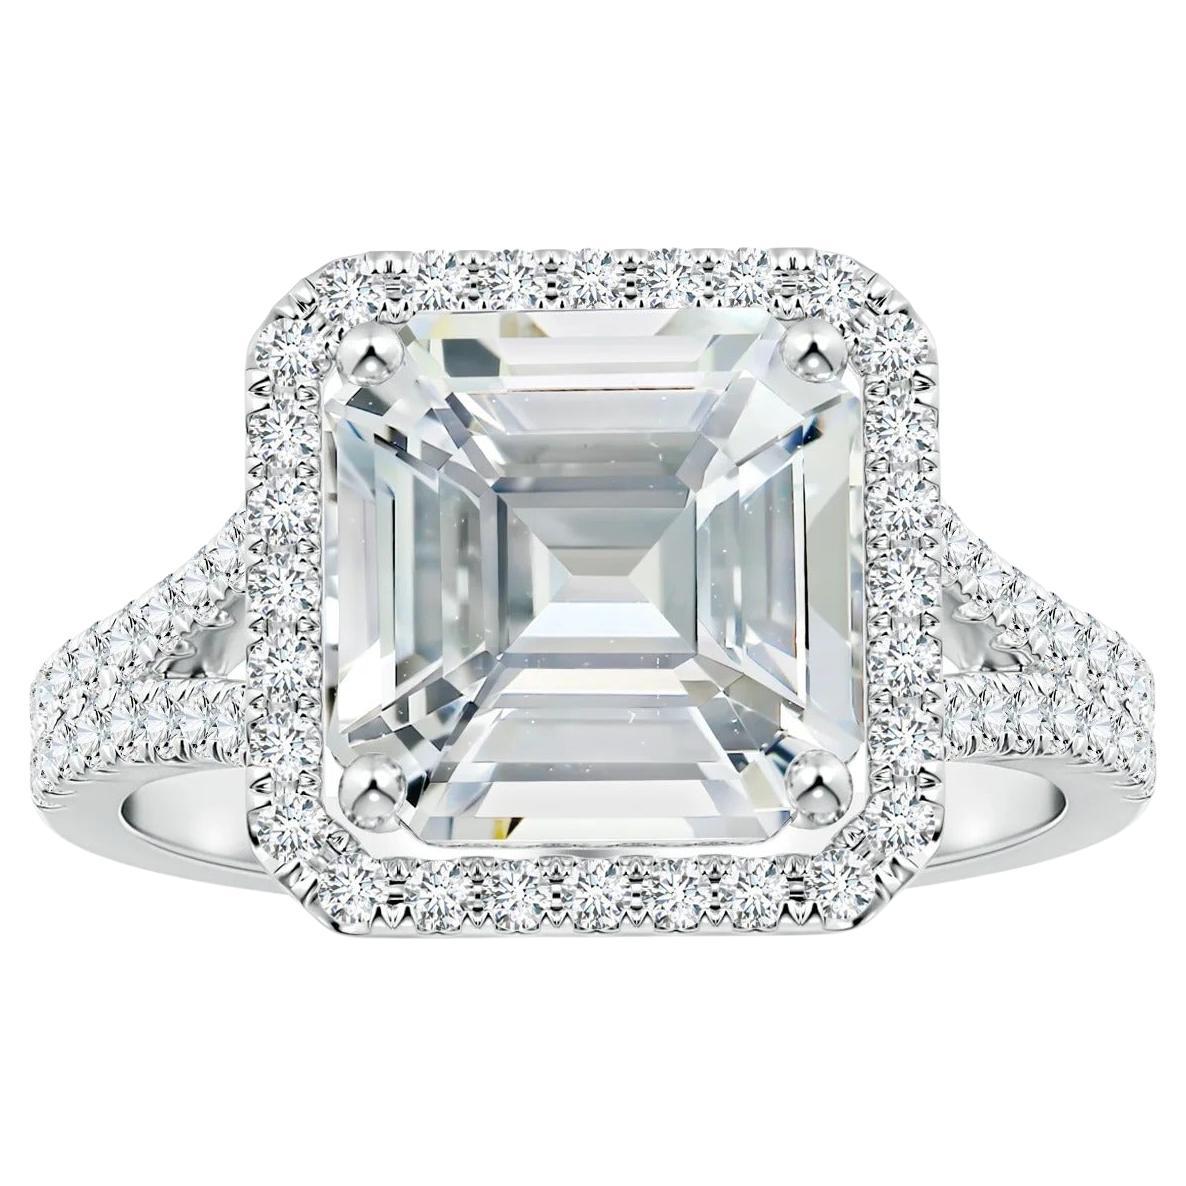 For Sale:  Angara Gia Certified Natural Emerald-Cut White Sapphire Halo Ring in White Gold